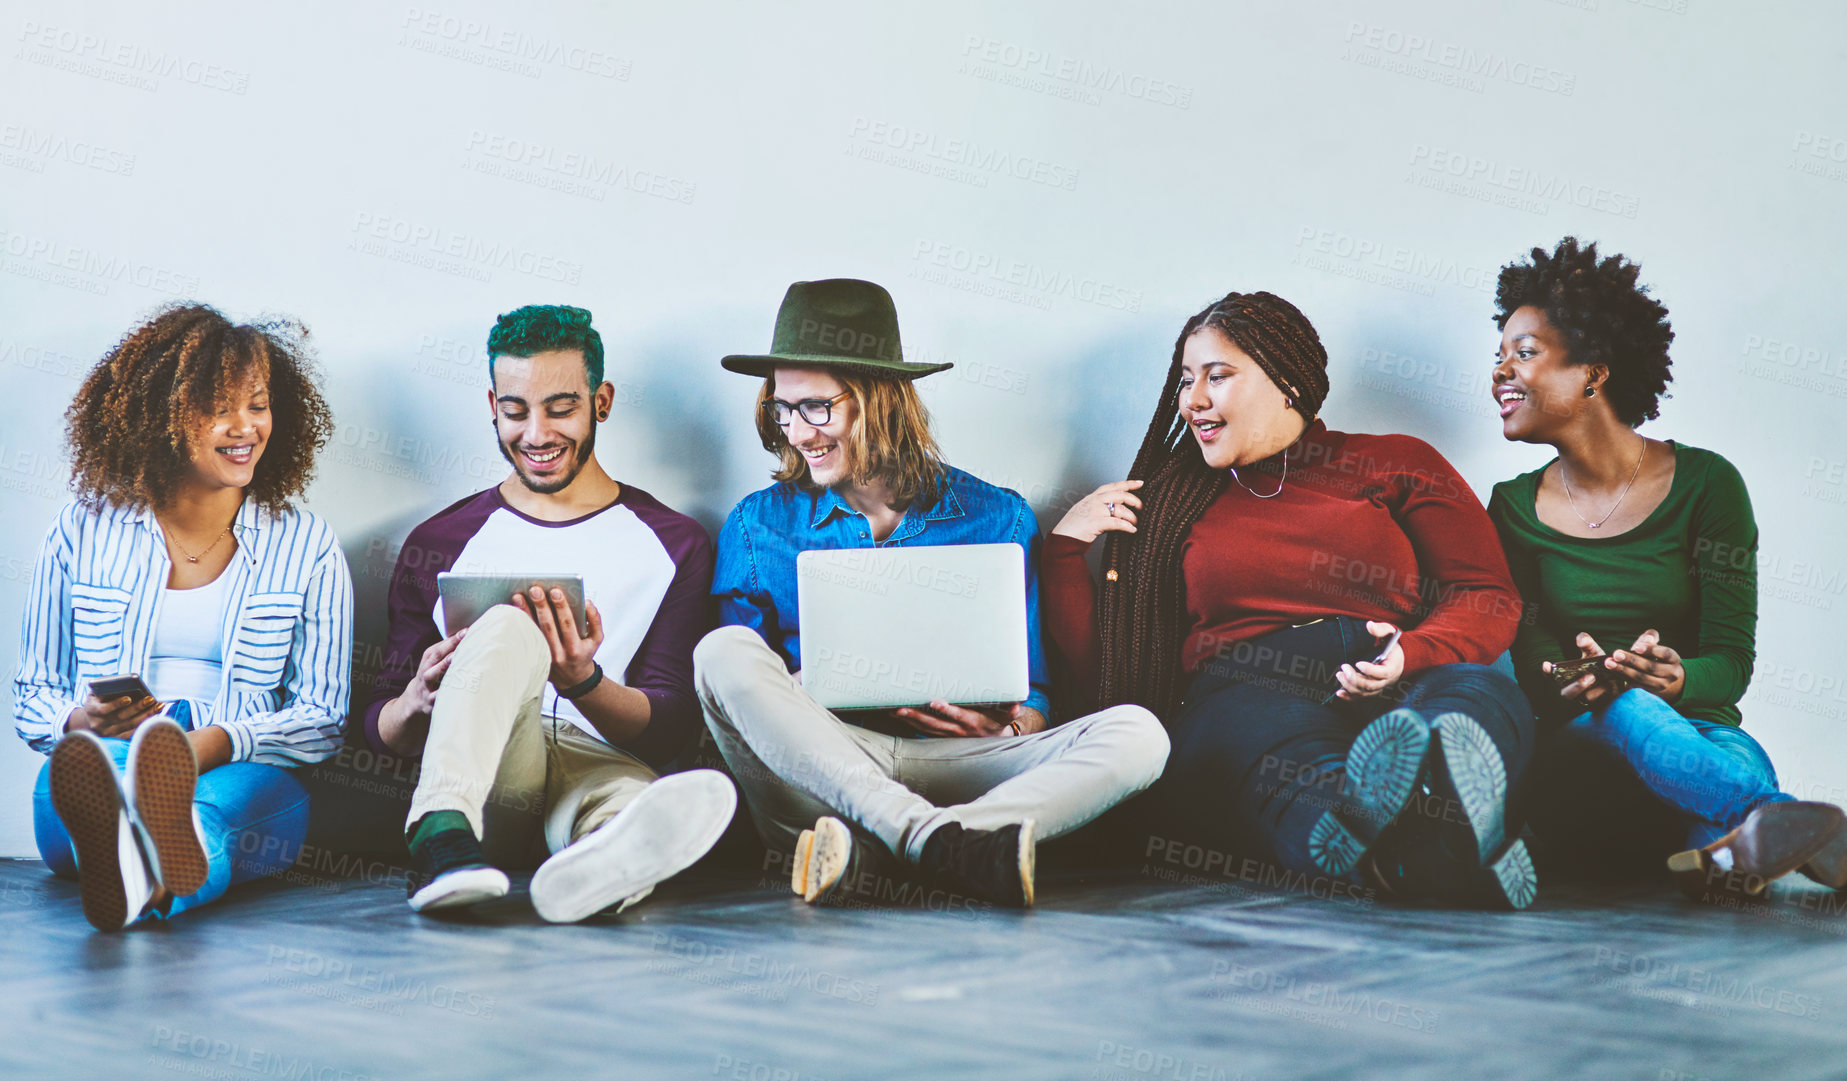 Buy stock photo Studio shot of a group of young people sitting on the floor and using wireless technology